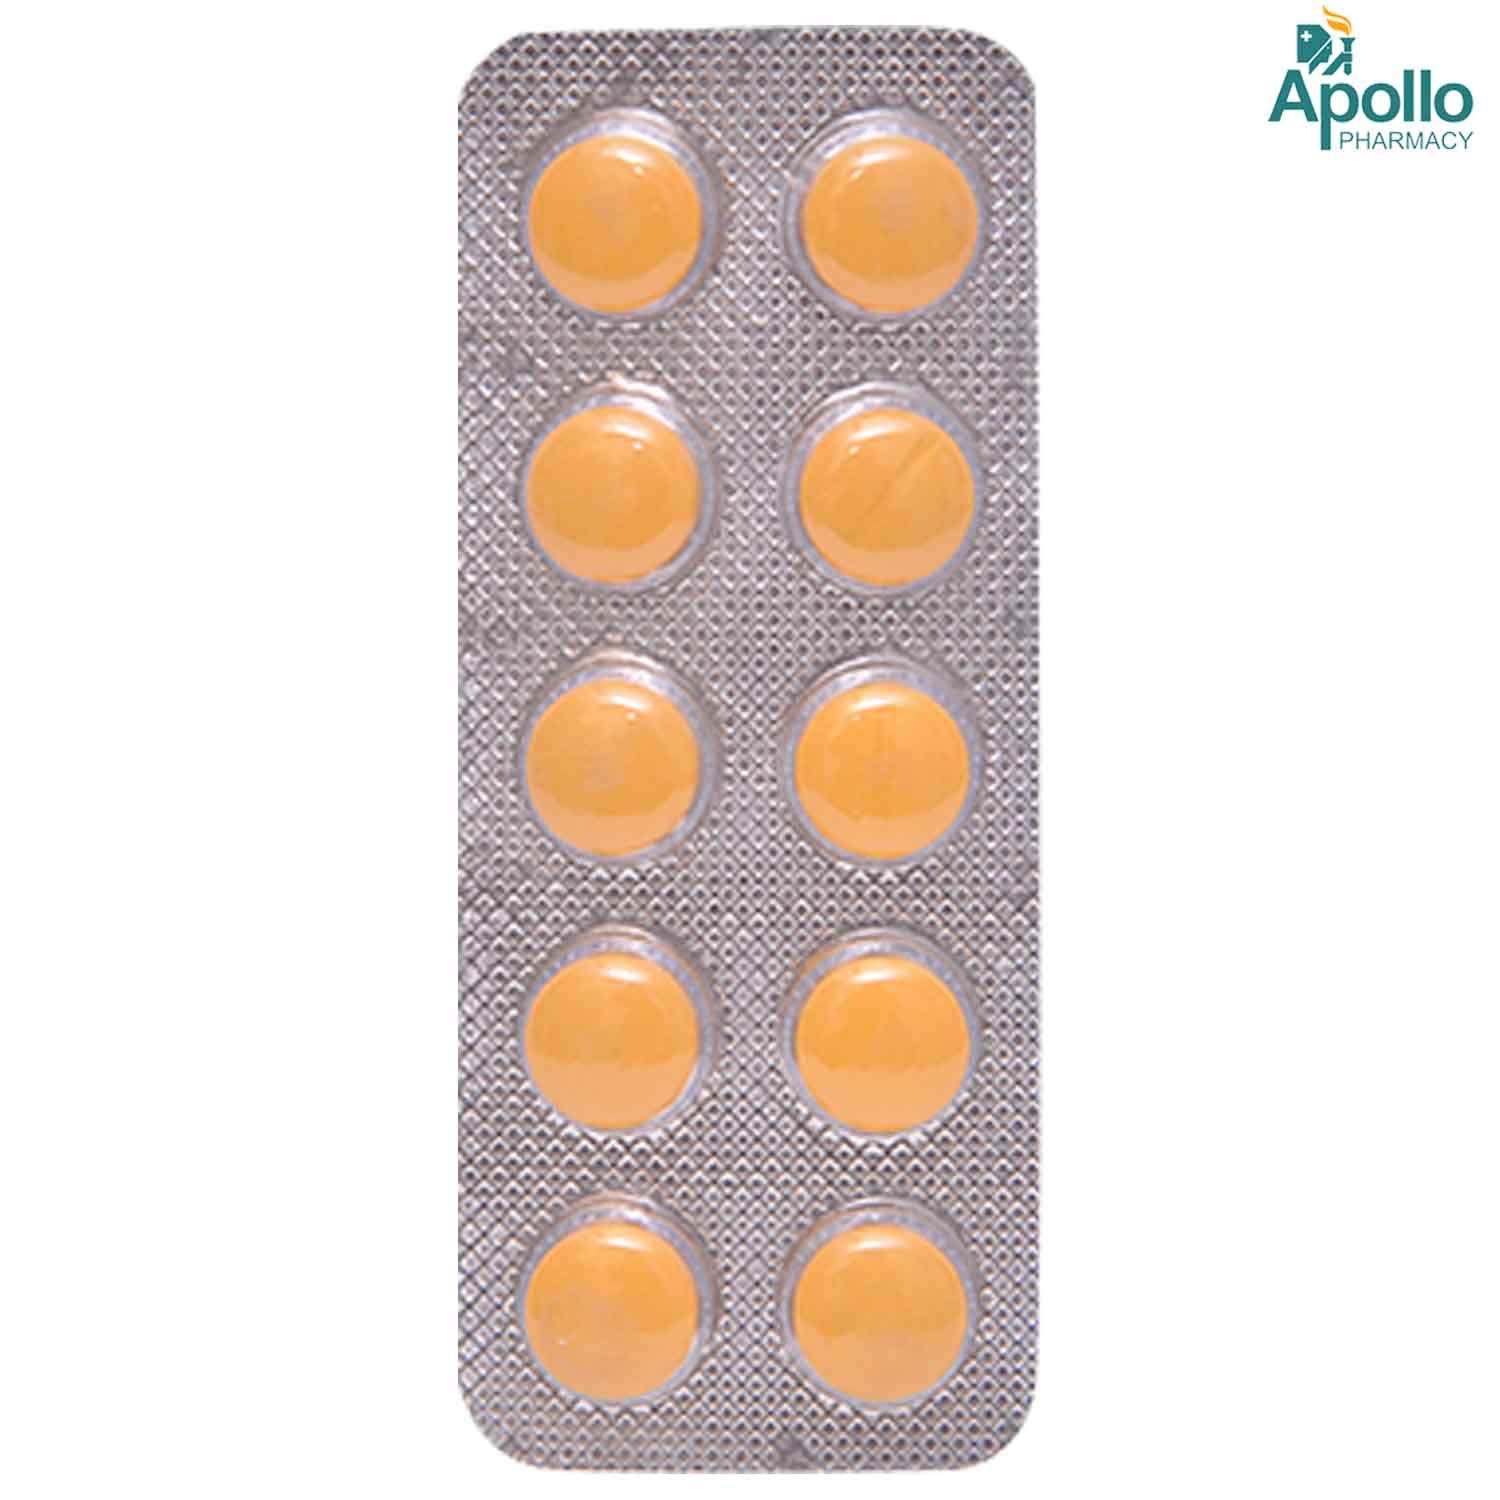 TALO S 20MG TABLET, Pack of 10 TABLETS